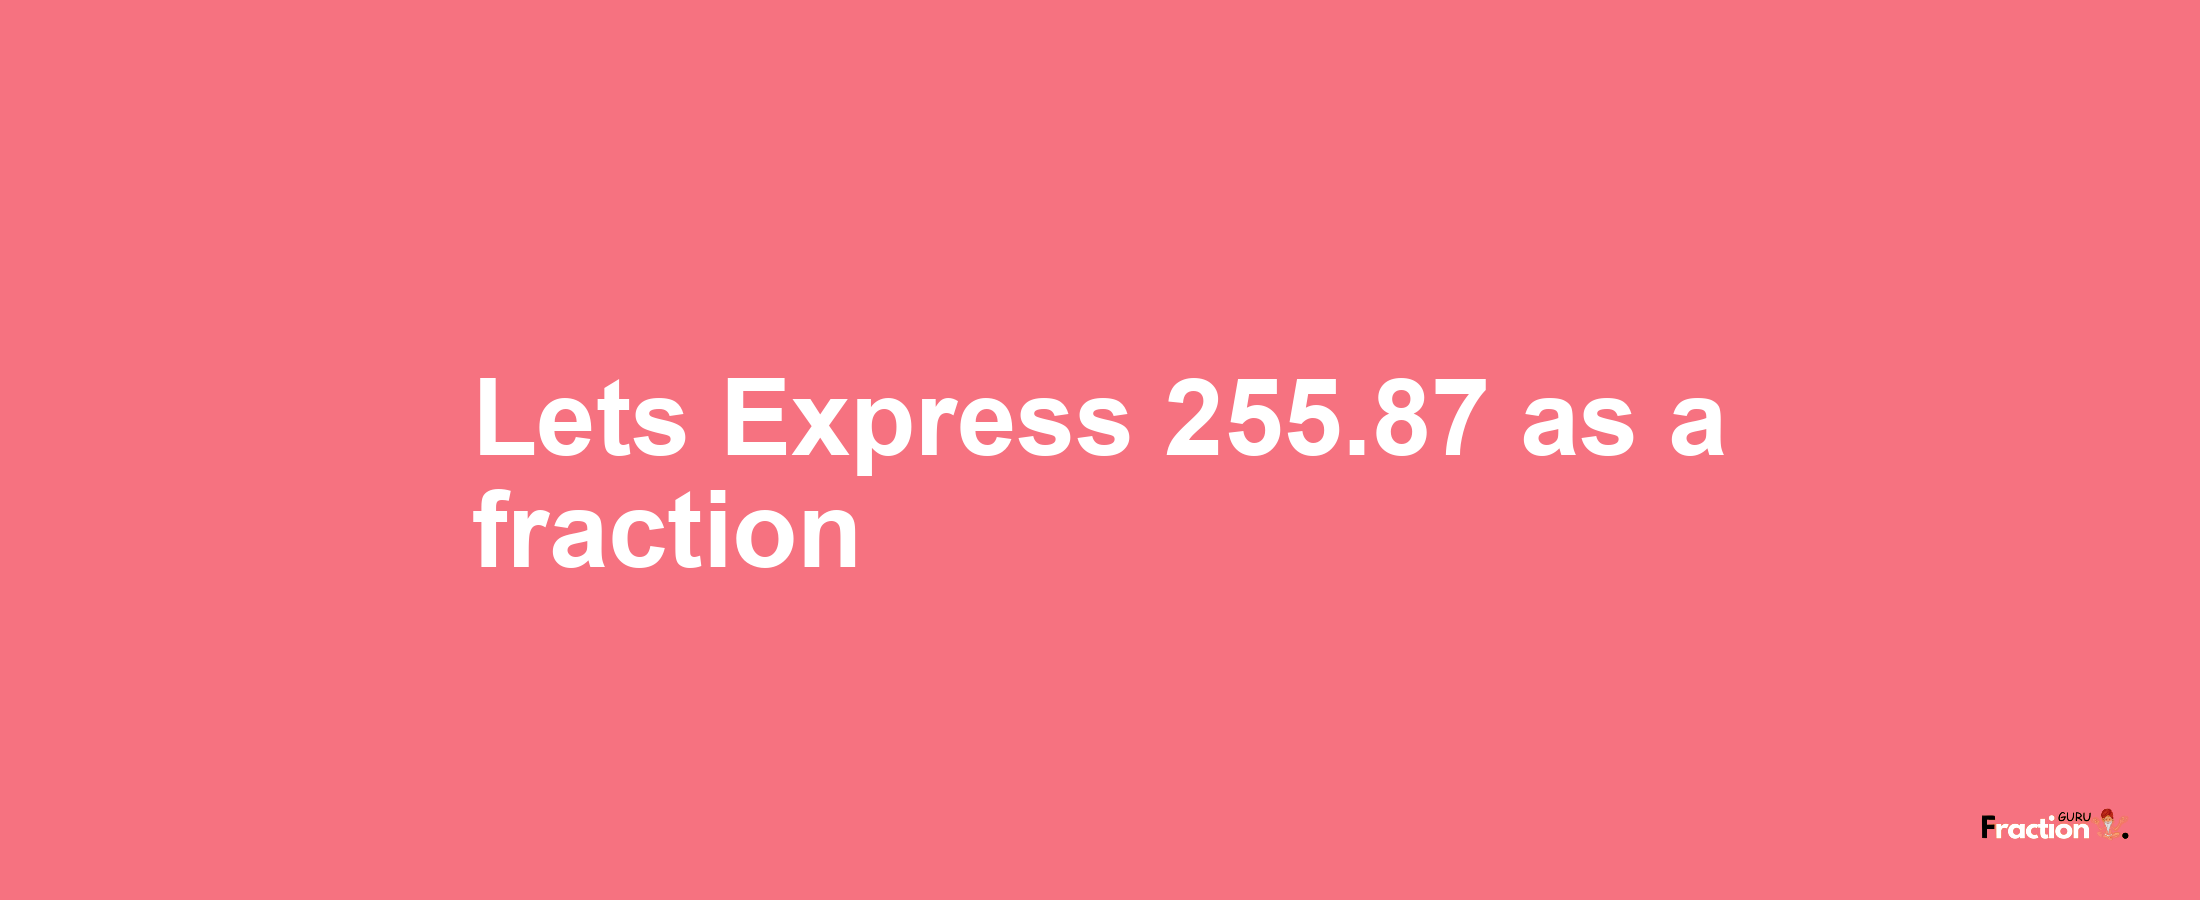 Lets Express 255.87 as afraction